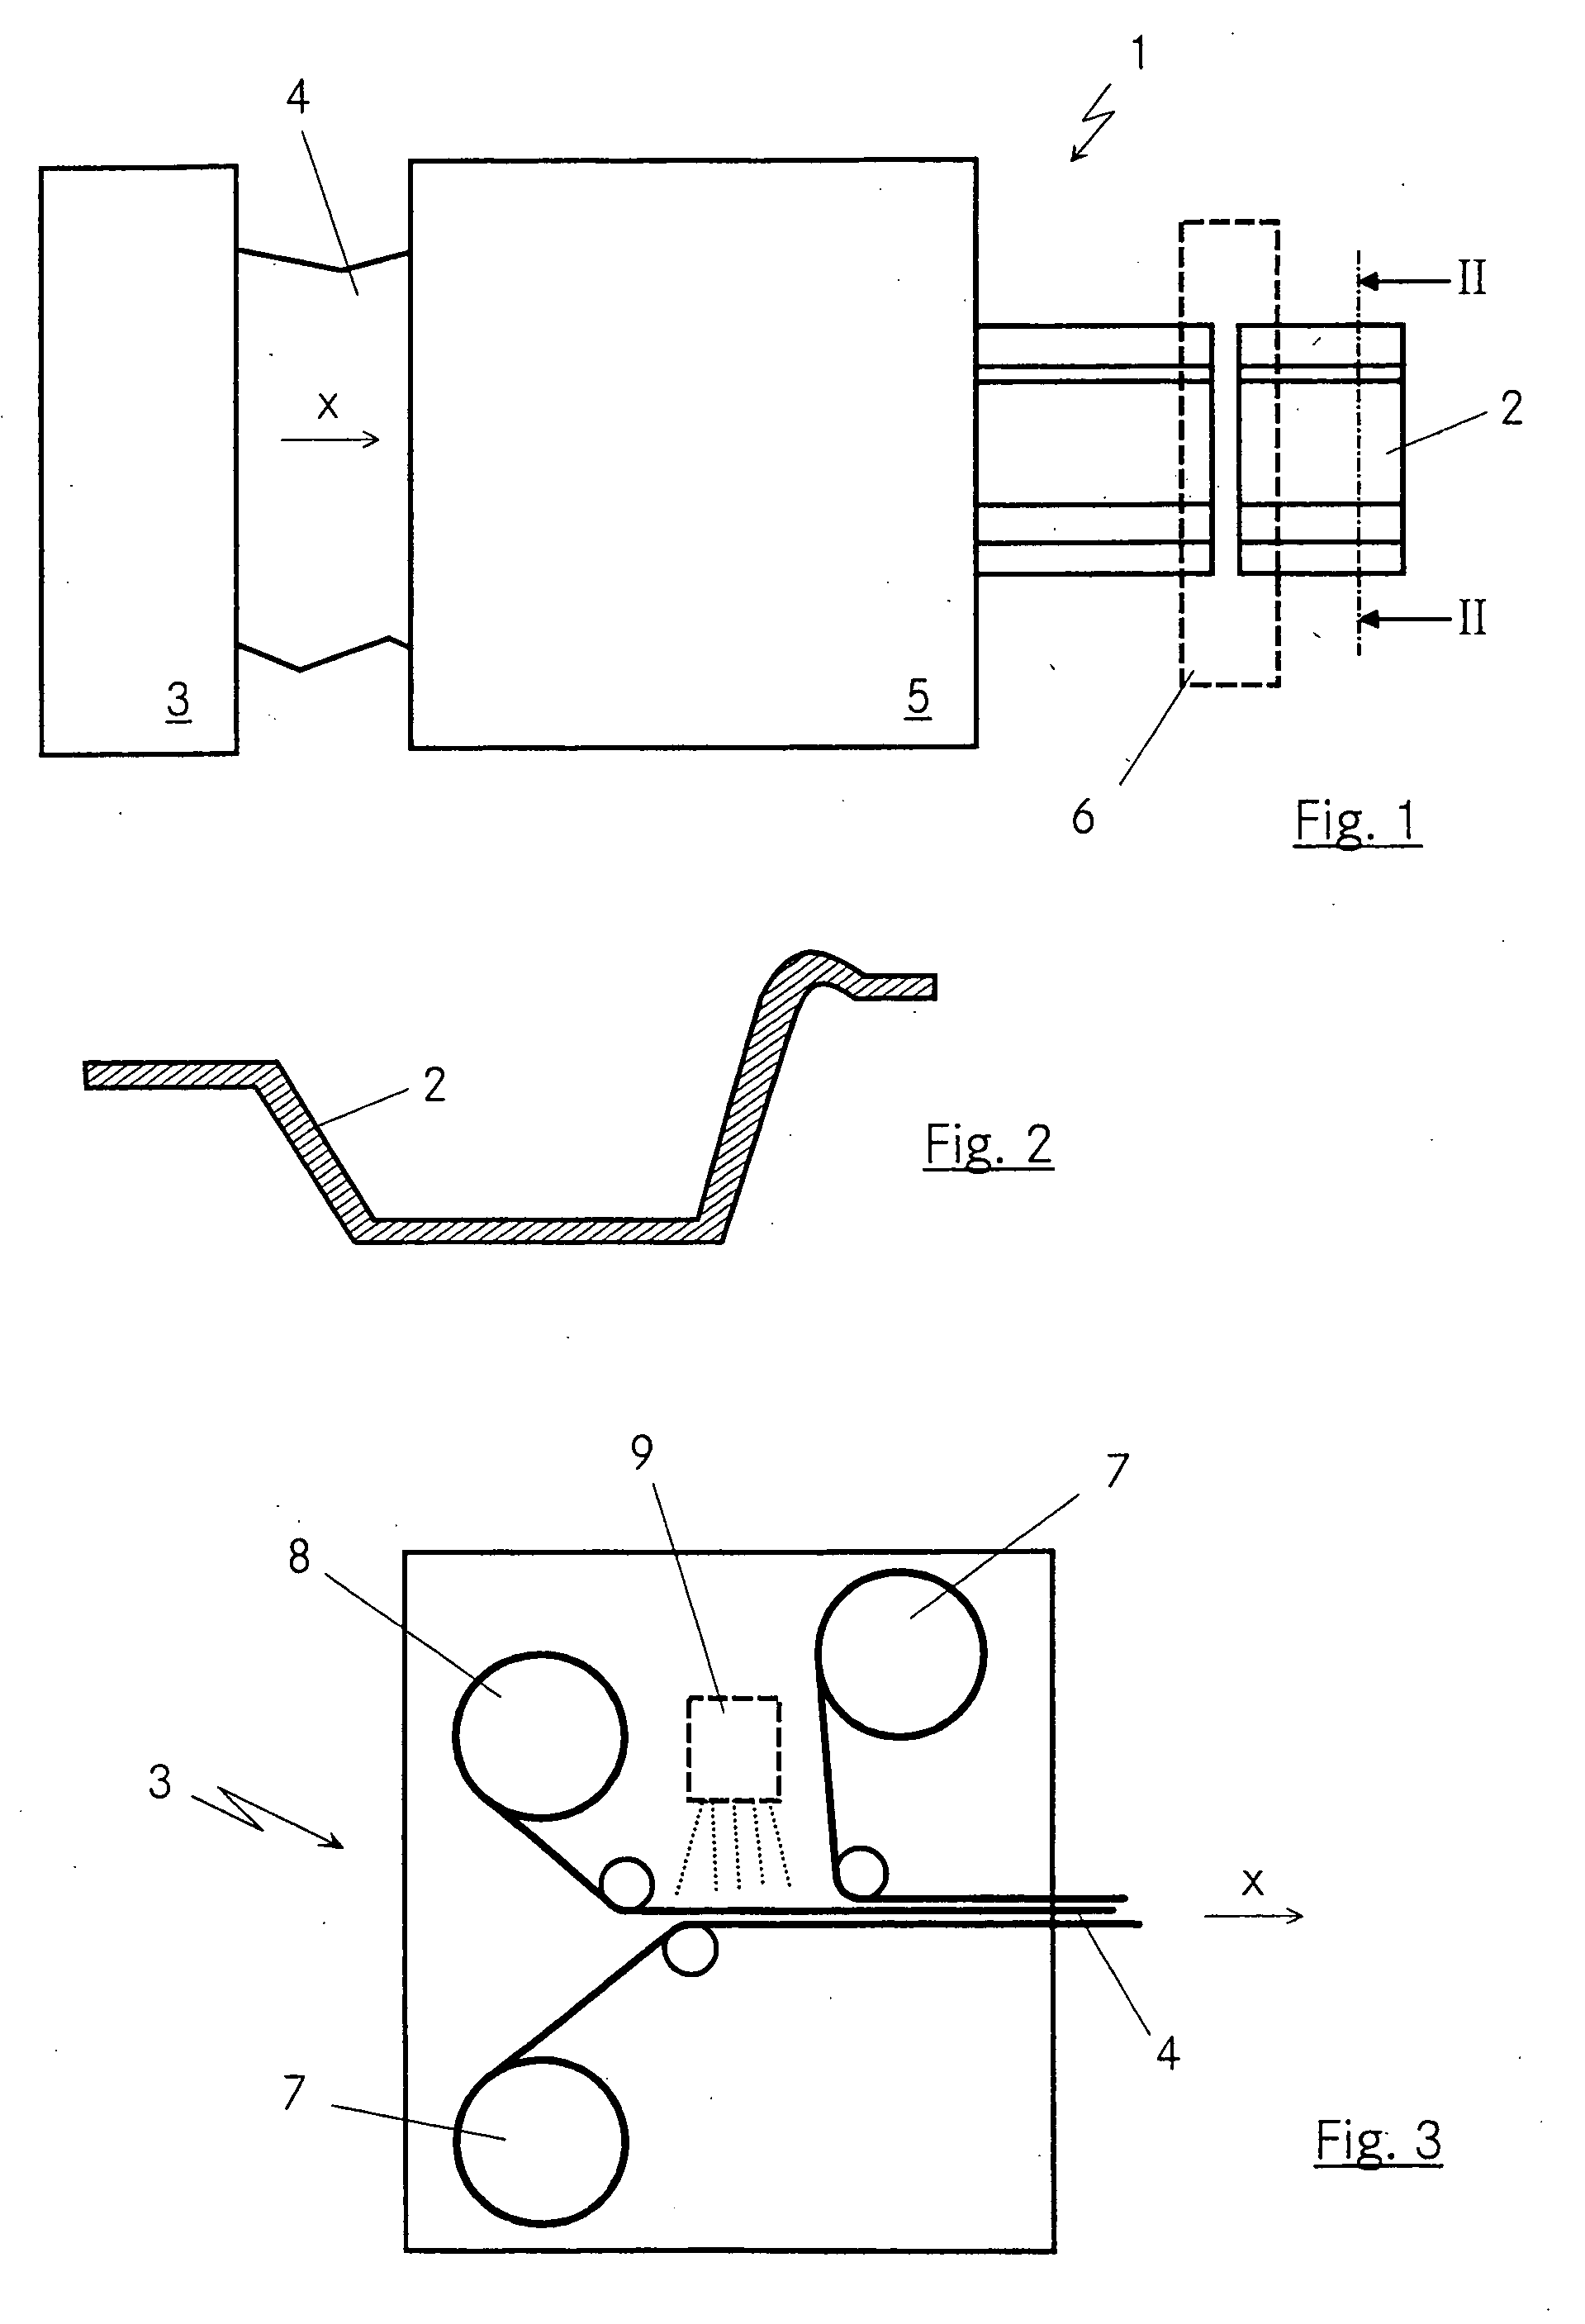 Process for producing plastic parts